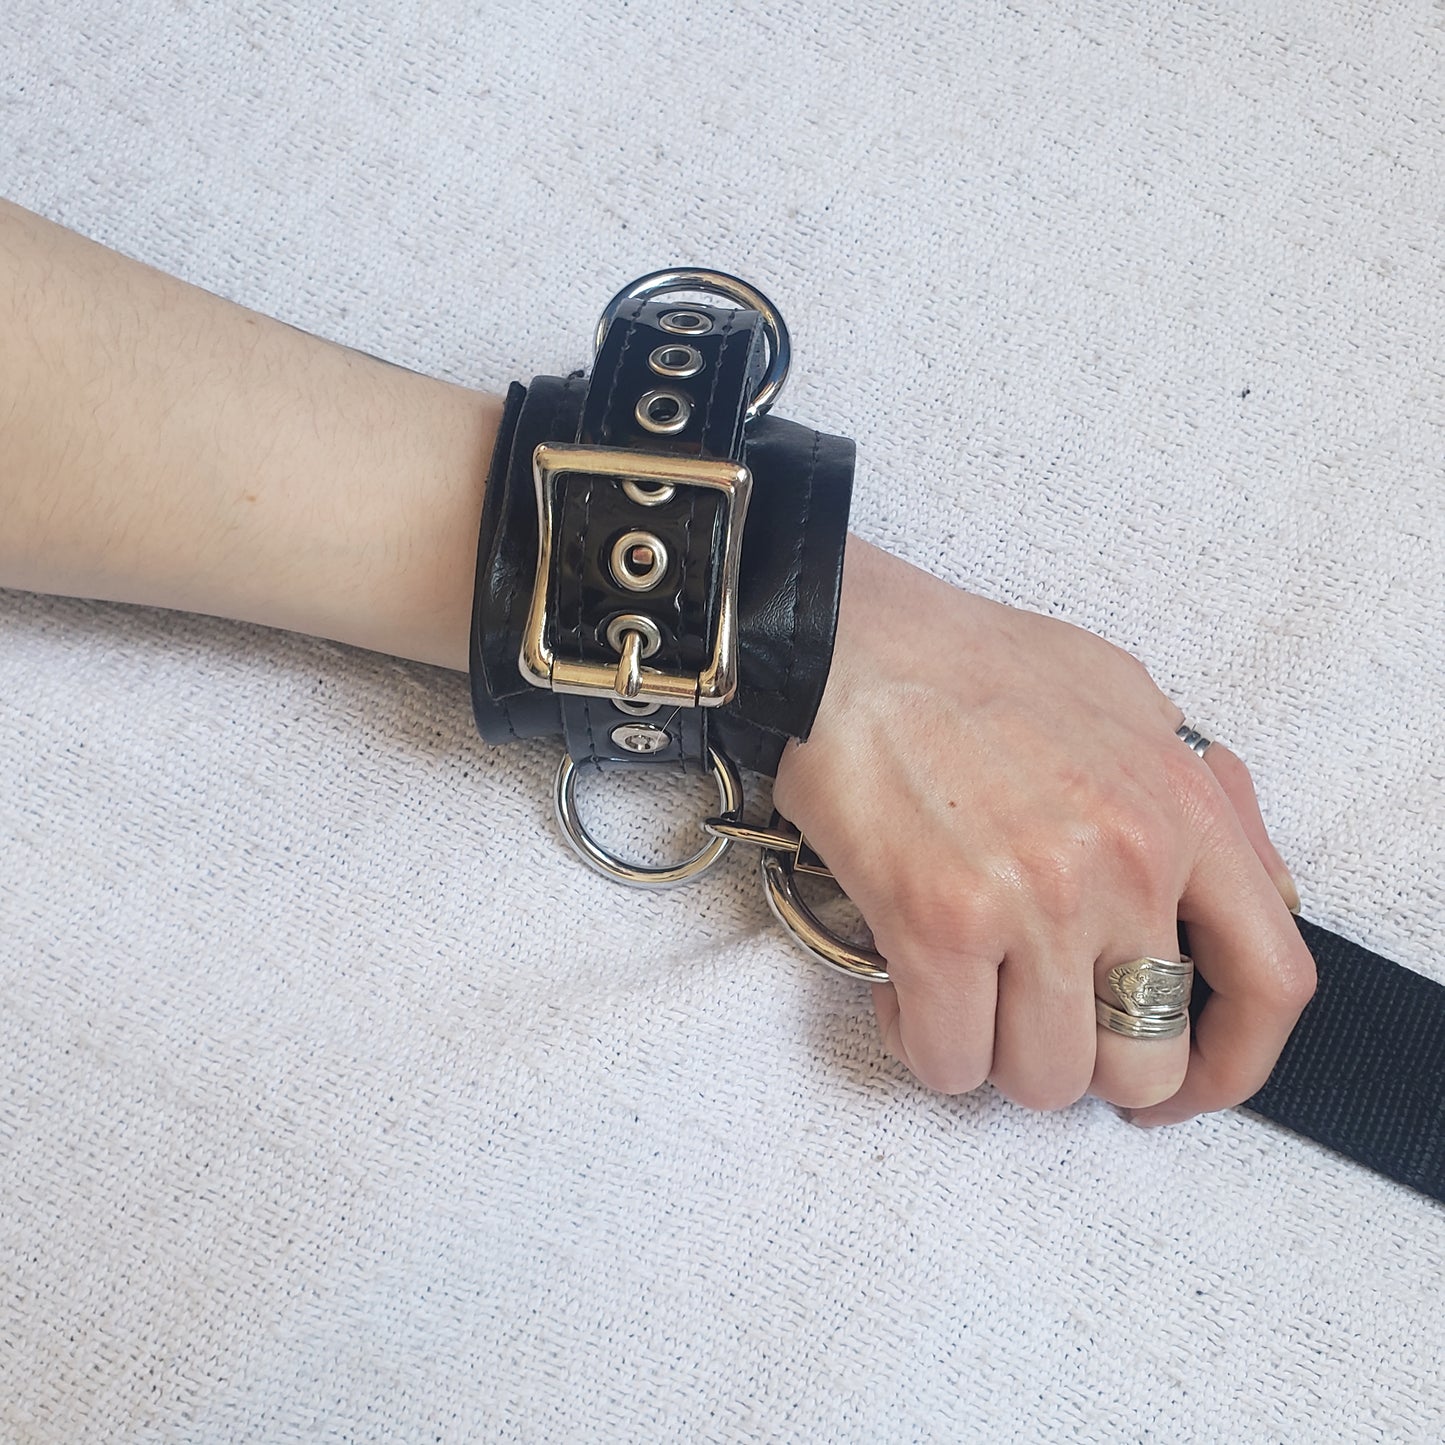 Wrist cuff with strap attached on model's hand. 